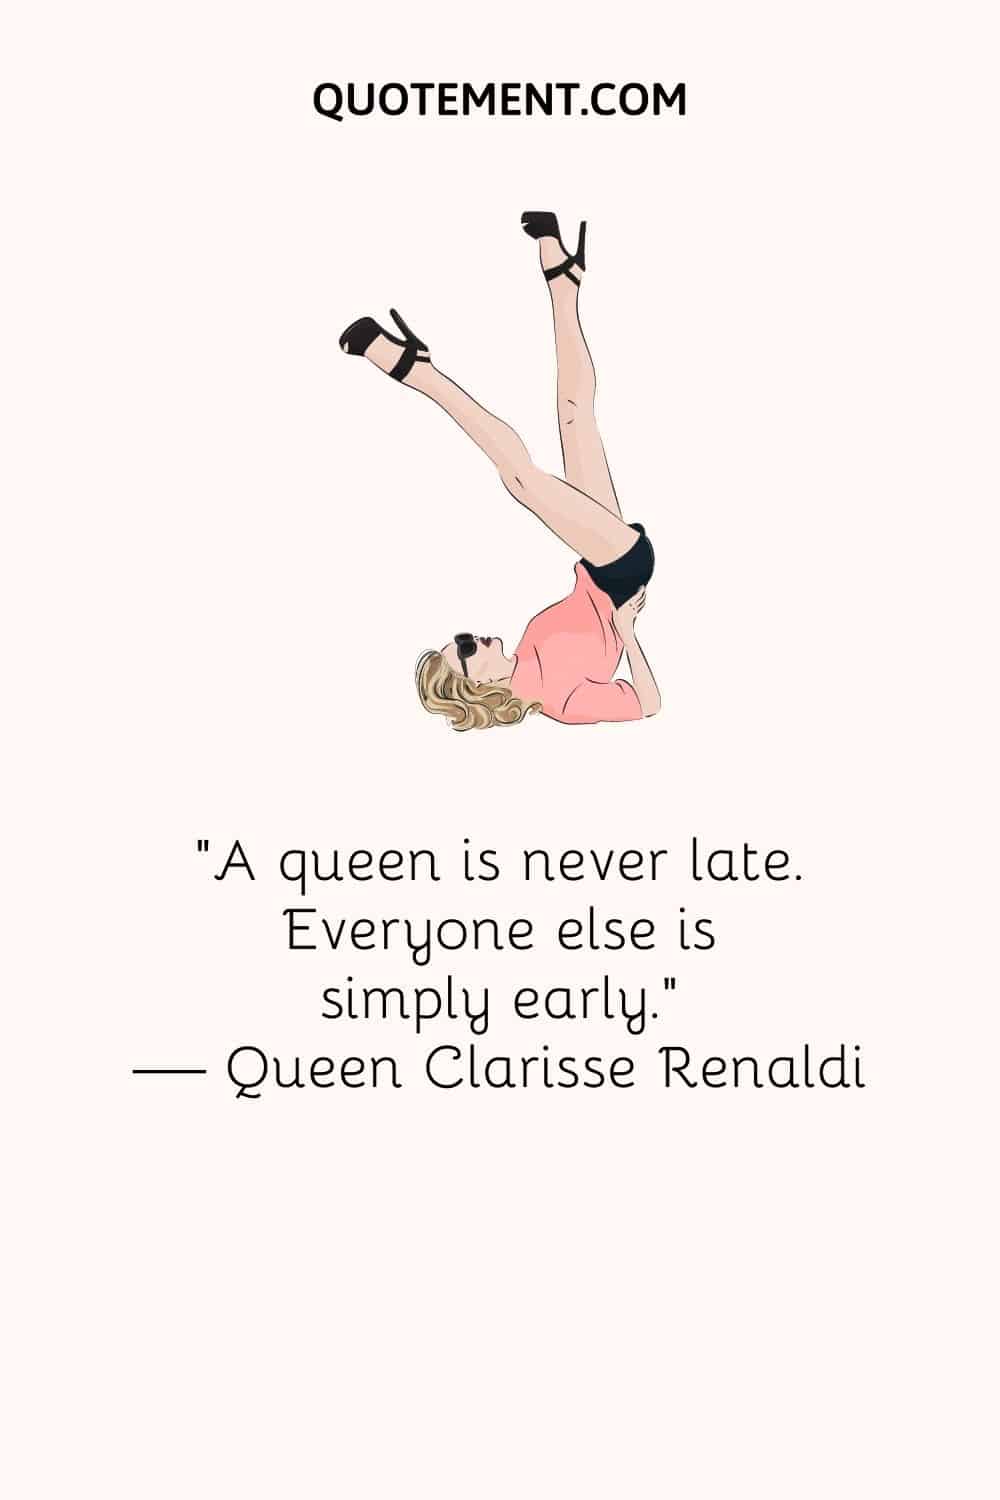 image of a girl in heels exercising representing queen savage quote